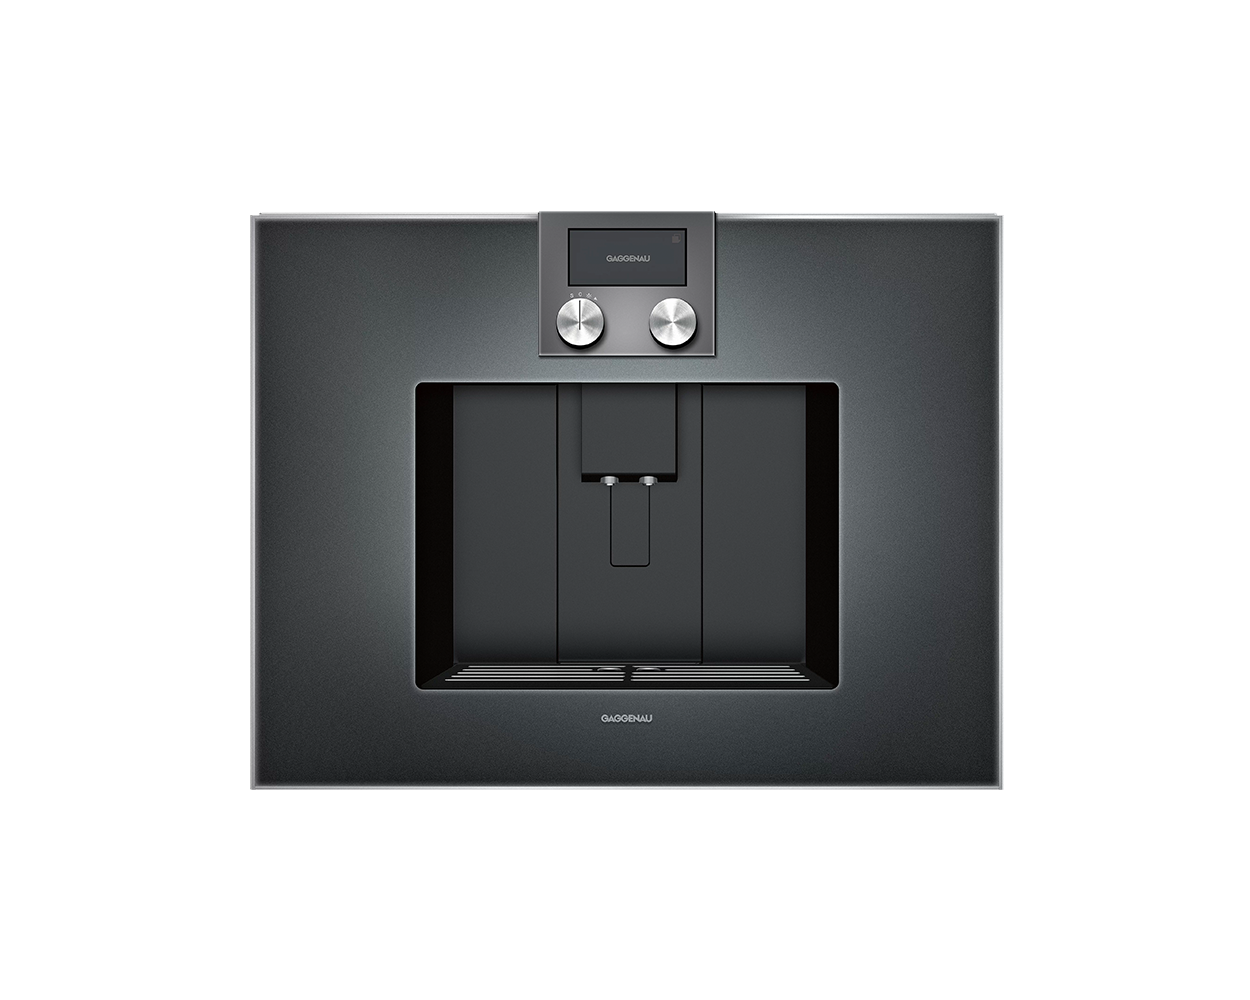 Luxury kitchen appliance brand Gaggenau 400 series fully automatic coffee machine. Buy in the UK with Krieder.